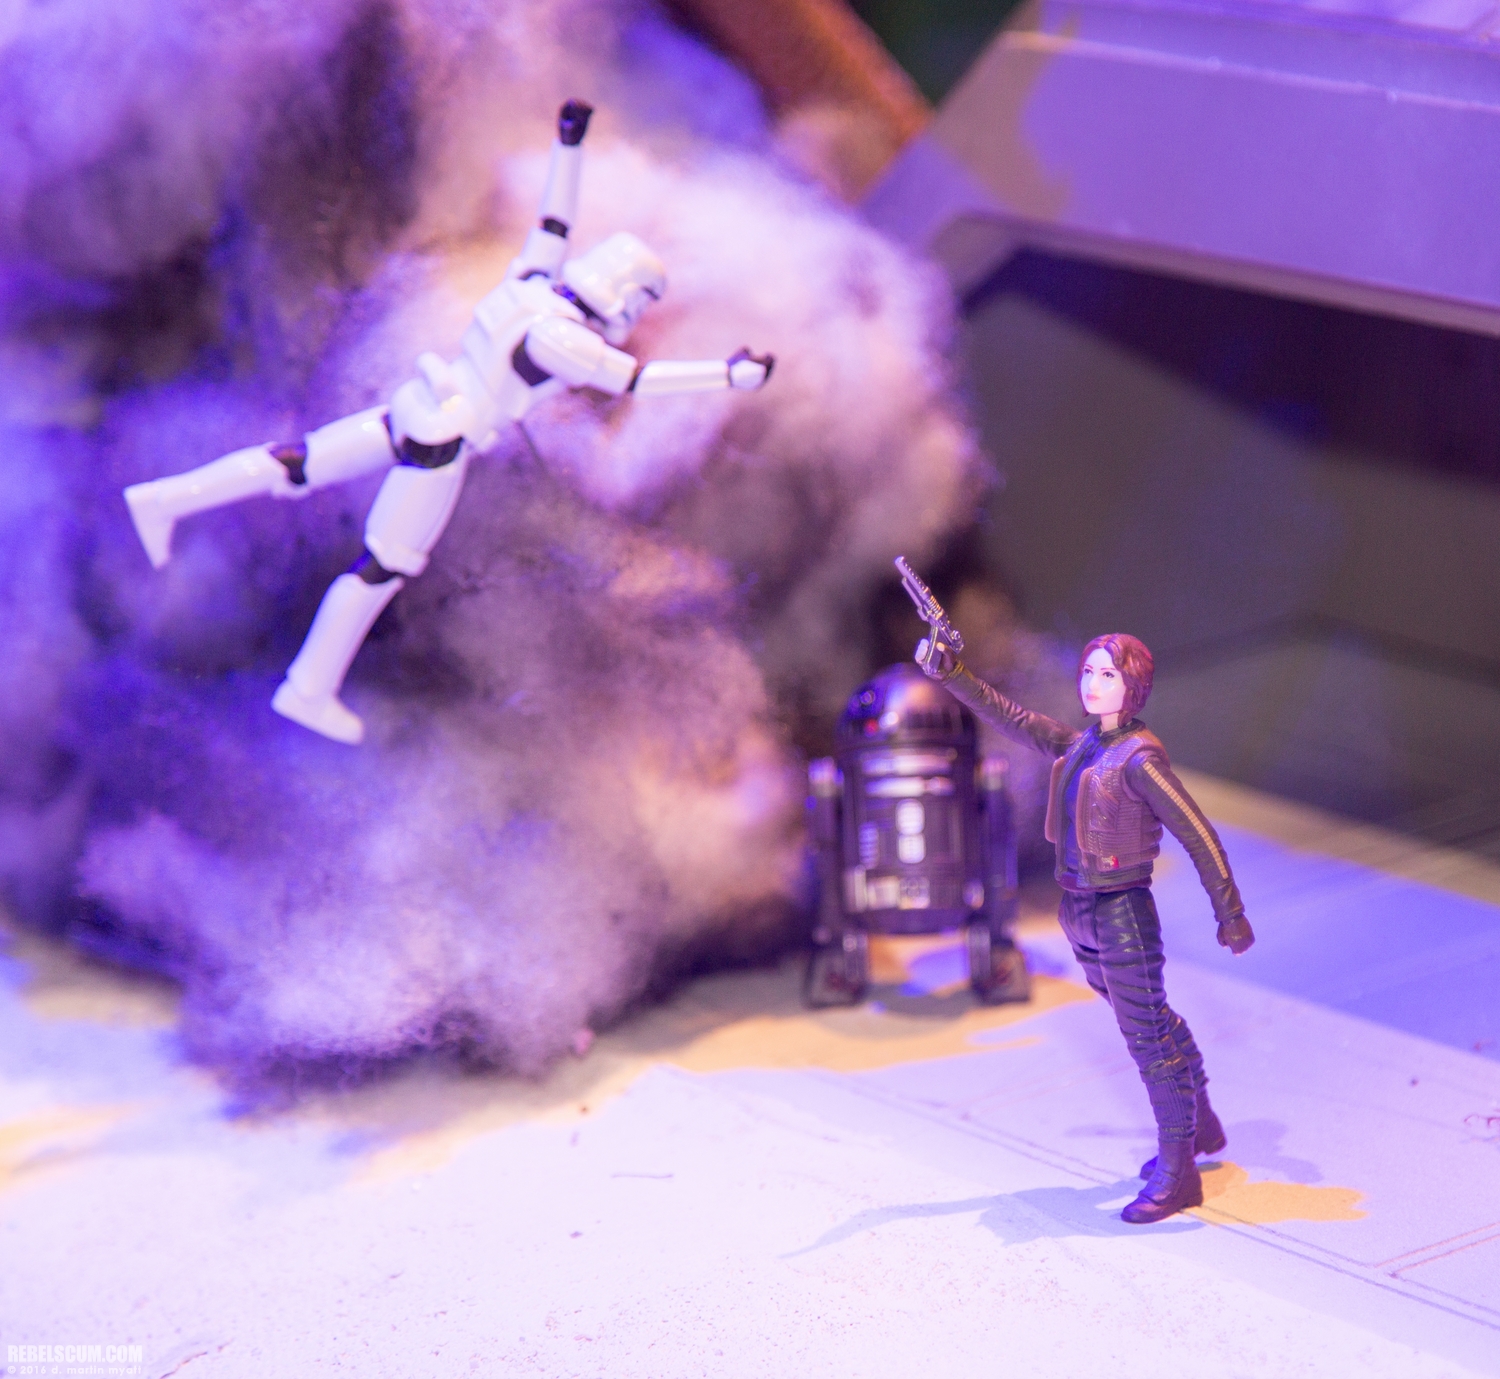 2016-SDCC-Sideshow-Collectibles-Star-Wars-081.jpg